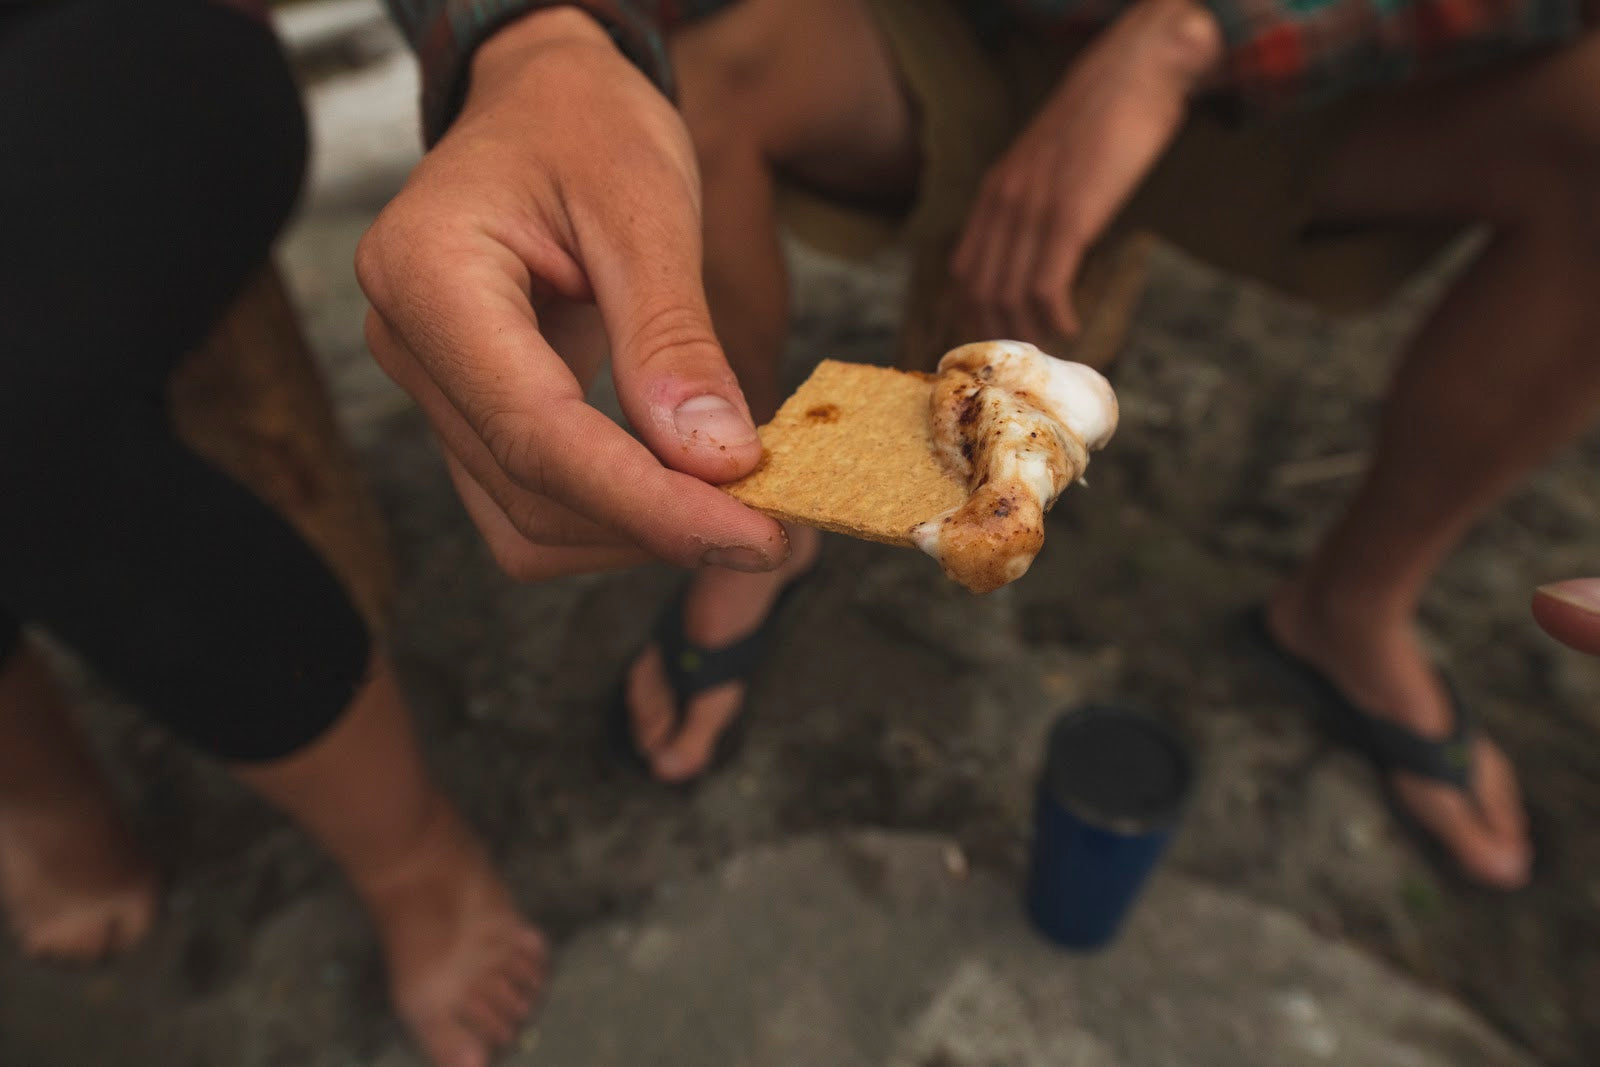 Satisfy Your Sweet Tooth With This Dutch Oven S'mores Bake